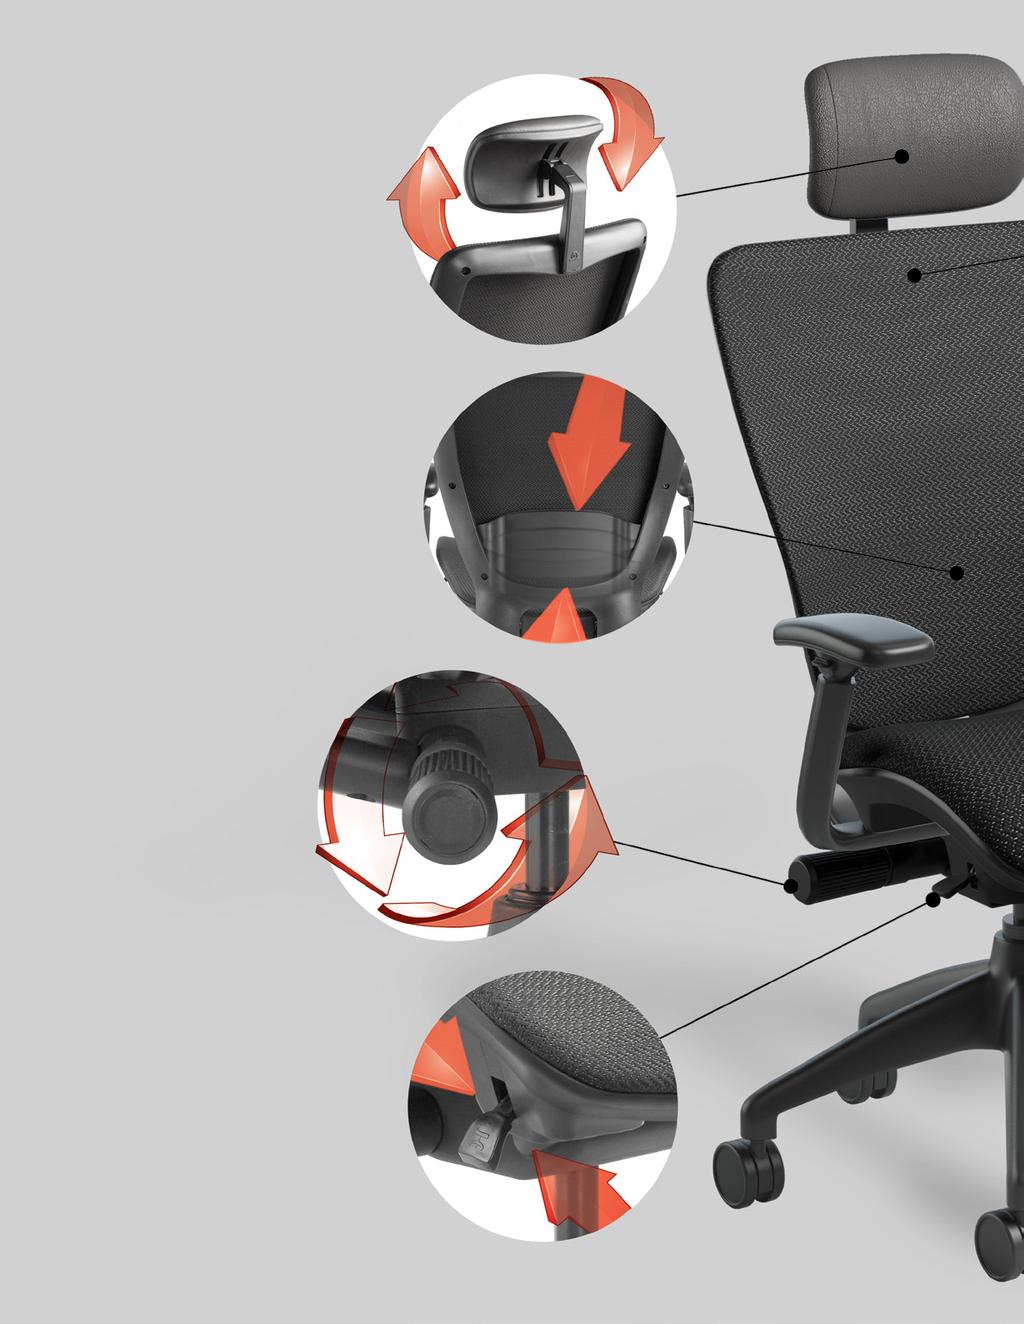 FEATURES ADJUSTABLE HEADREST Intuitive headrest can be easily adjusted up, down or angled for comfortable neck and back support.